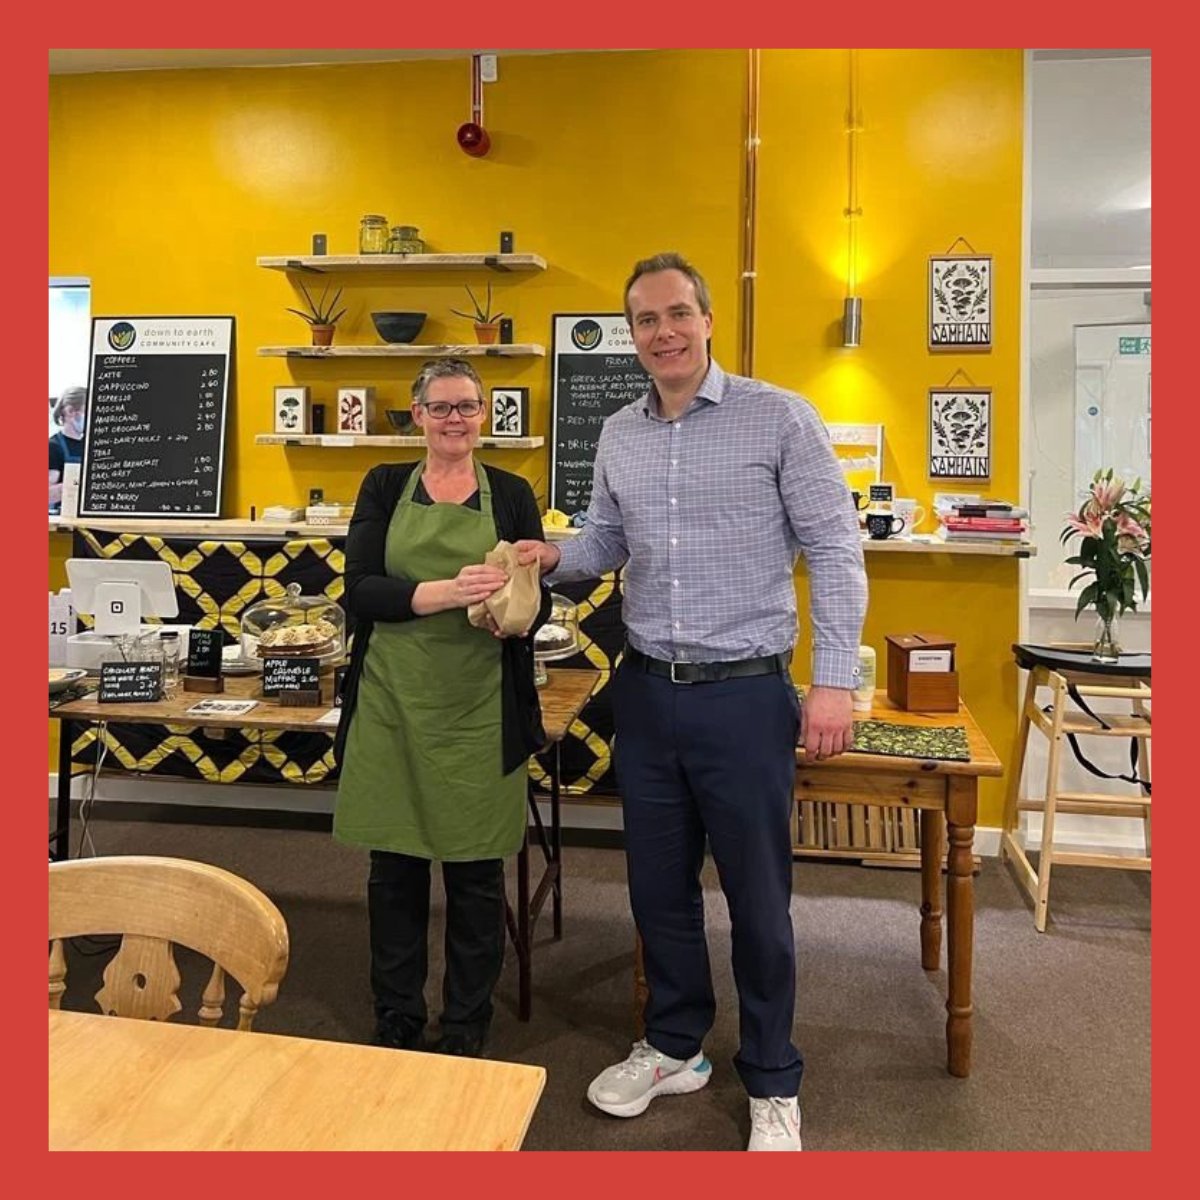 Our community space The Old Stables had a visit from @david4wantage MP. He met with residents in which he got to understand the importance of the work that we do in providing ownership in creating a more sustainable and inclusive world.

⁠#meanwhilespace #inclusiveeconomy